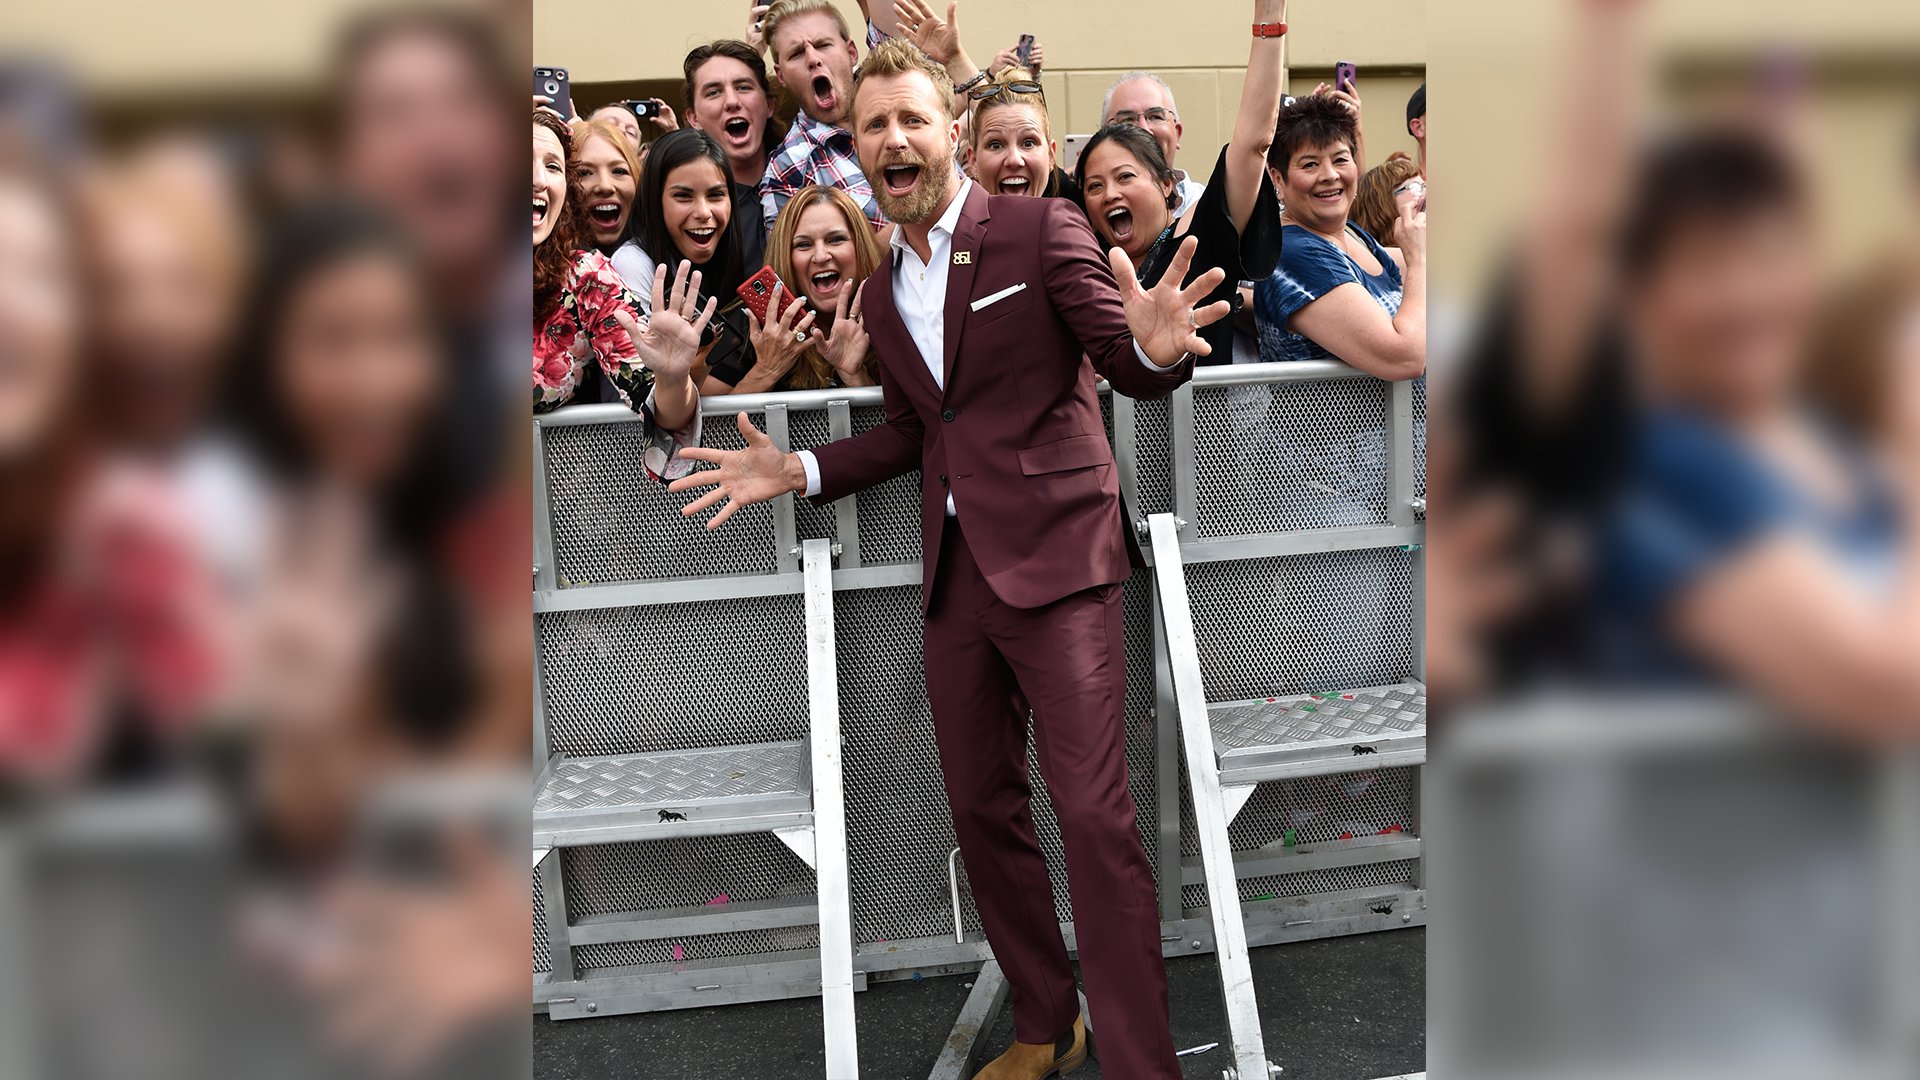 Dierks Bentley can't help but bust out a couple jazz hands while posing with eager fans.